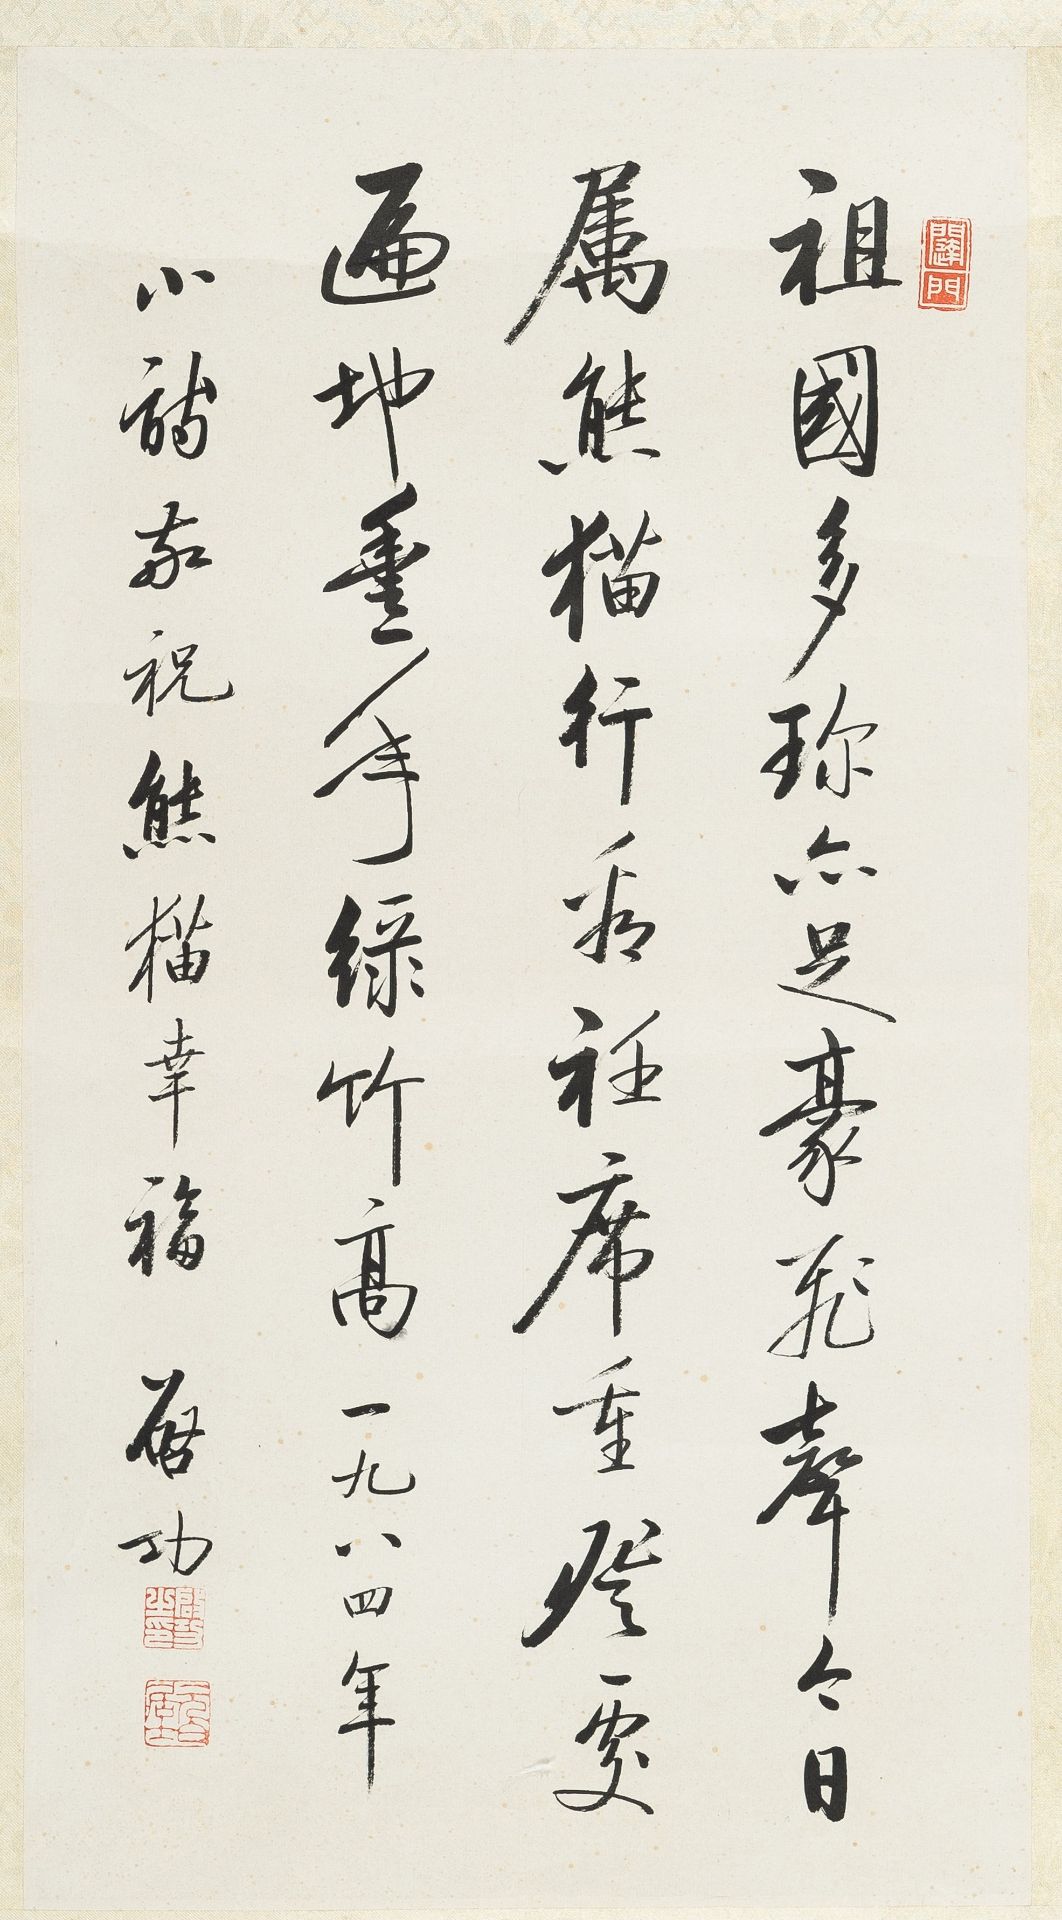 FINE CALLIGRAPHY ', BY QI GONG (1912-2005), DATED 1984